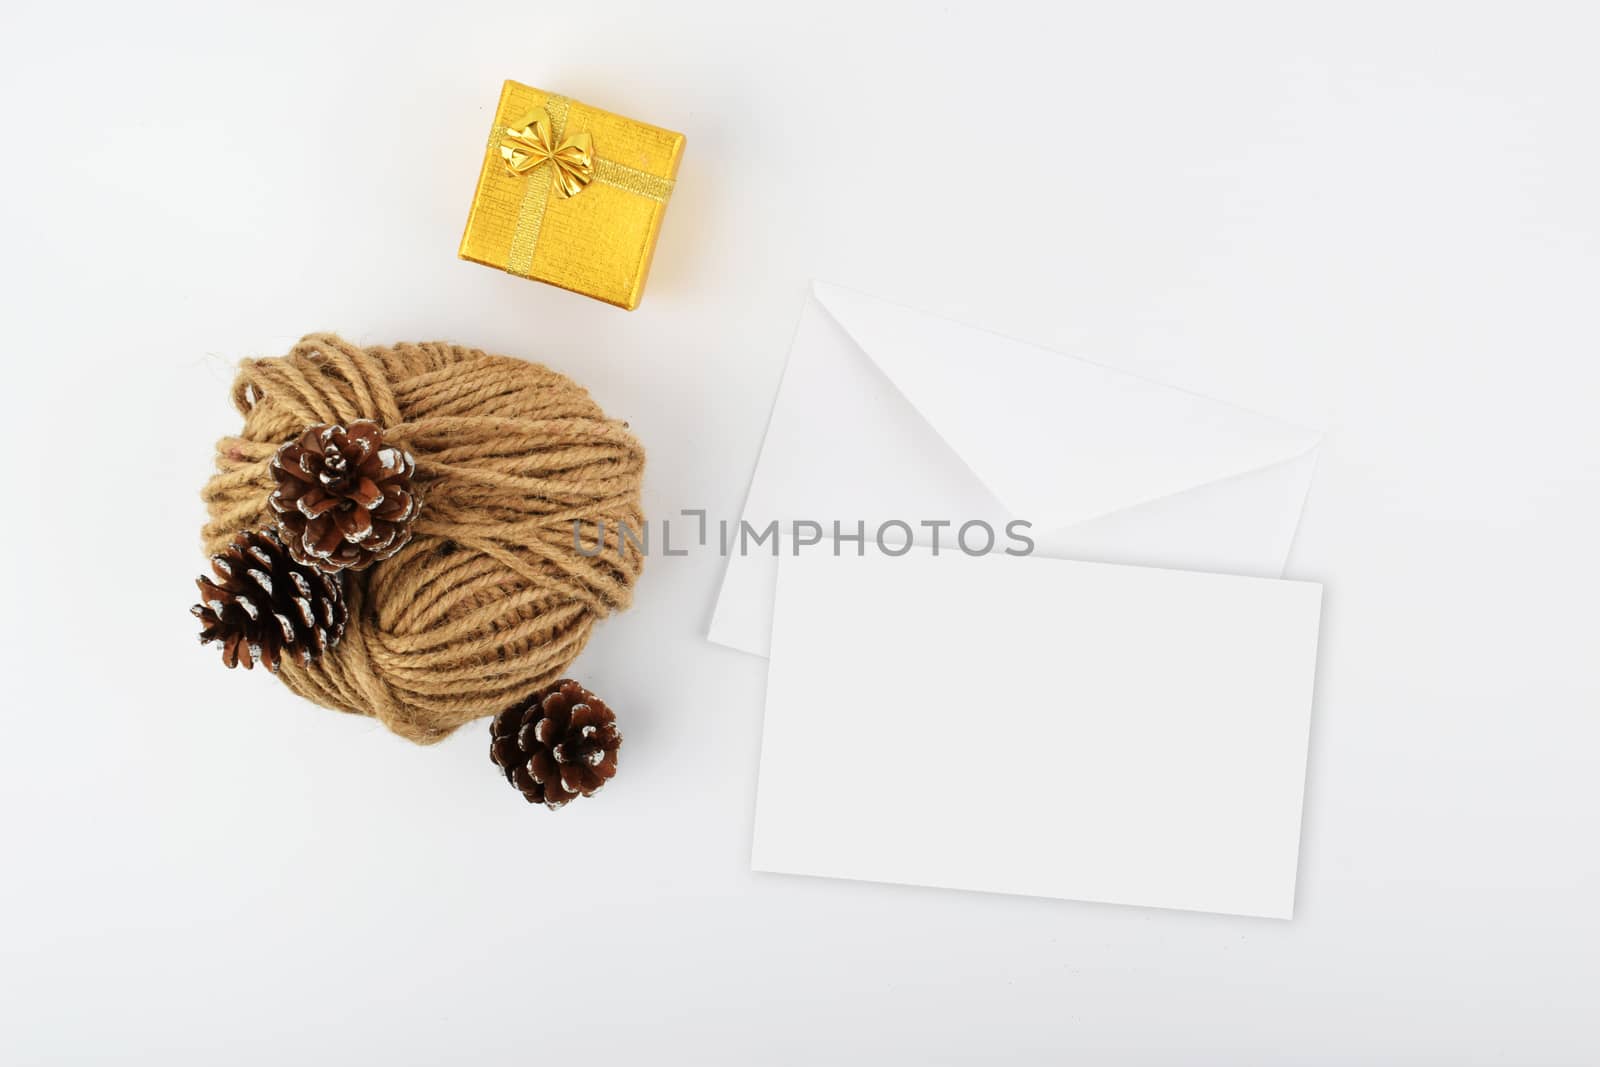 mock up objects New Year's mood on a white background with copy space, top view.